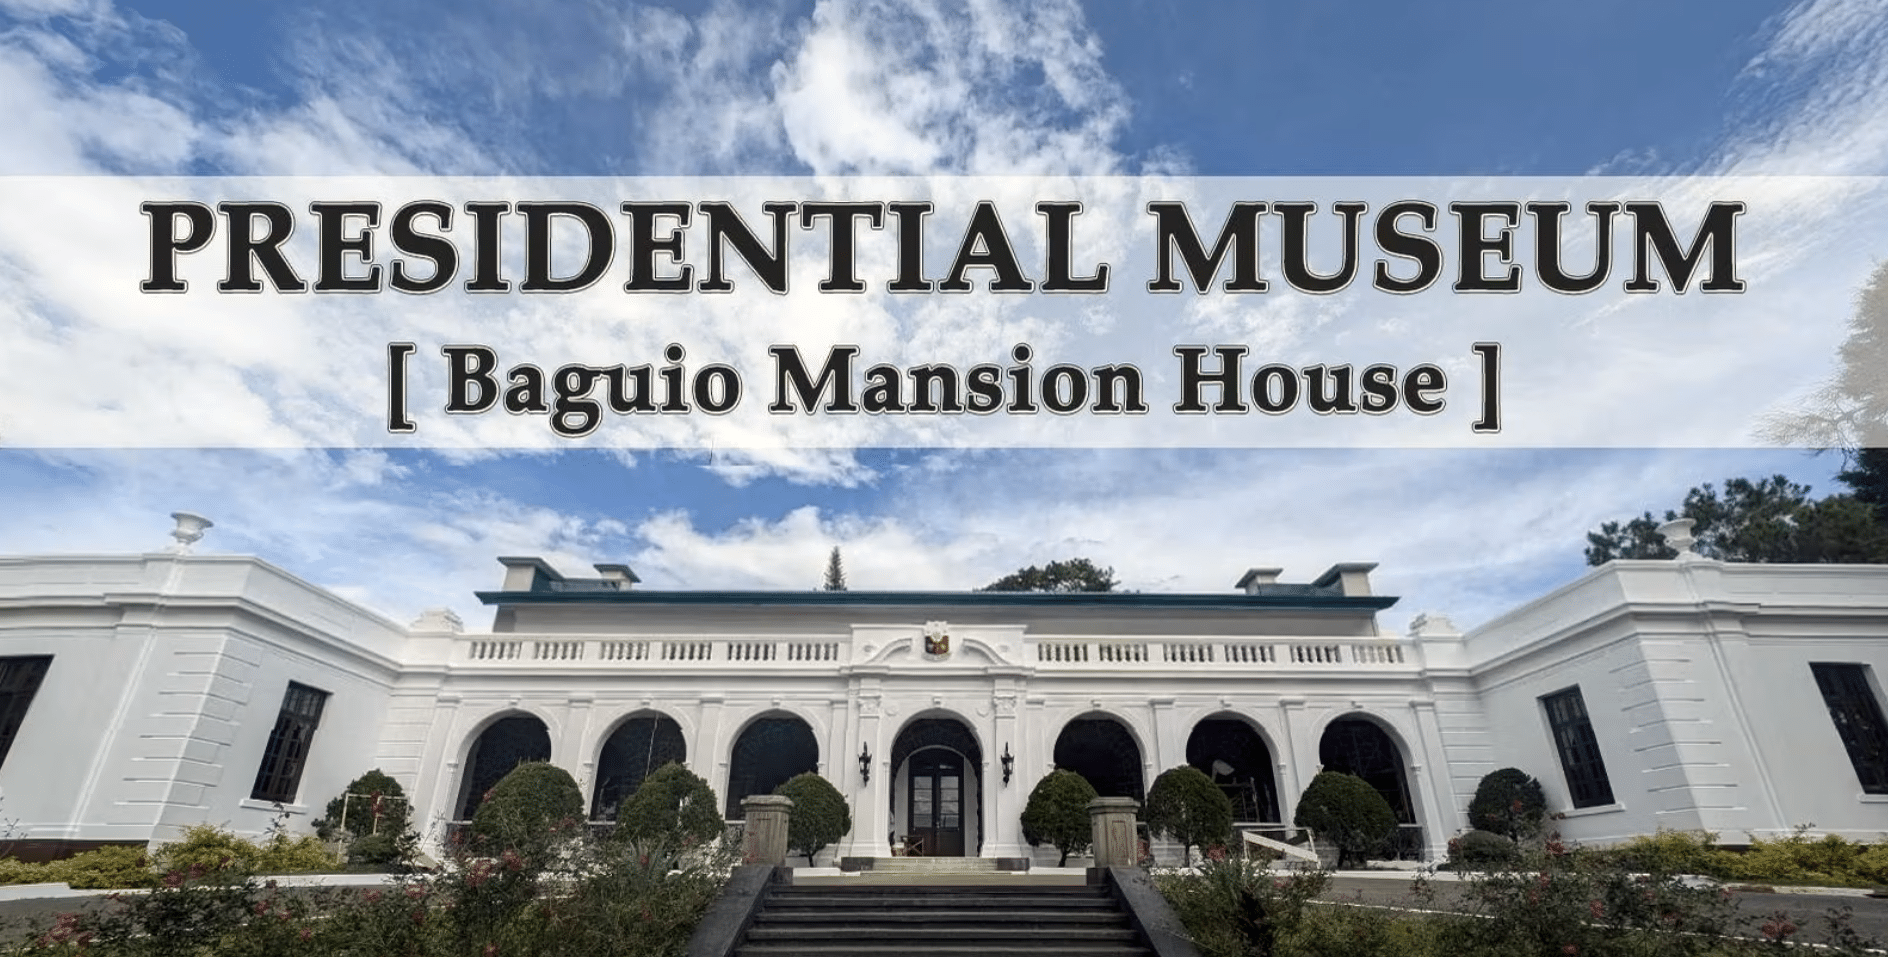 Presidential Museum at Baguio Mansion House opening soon